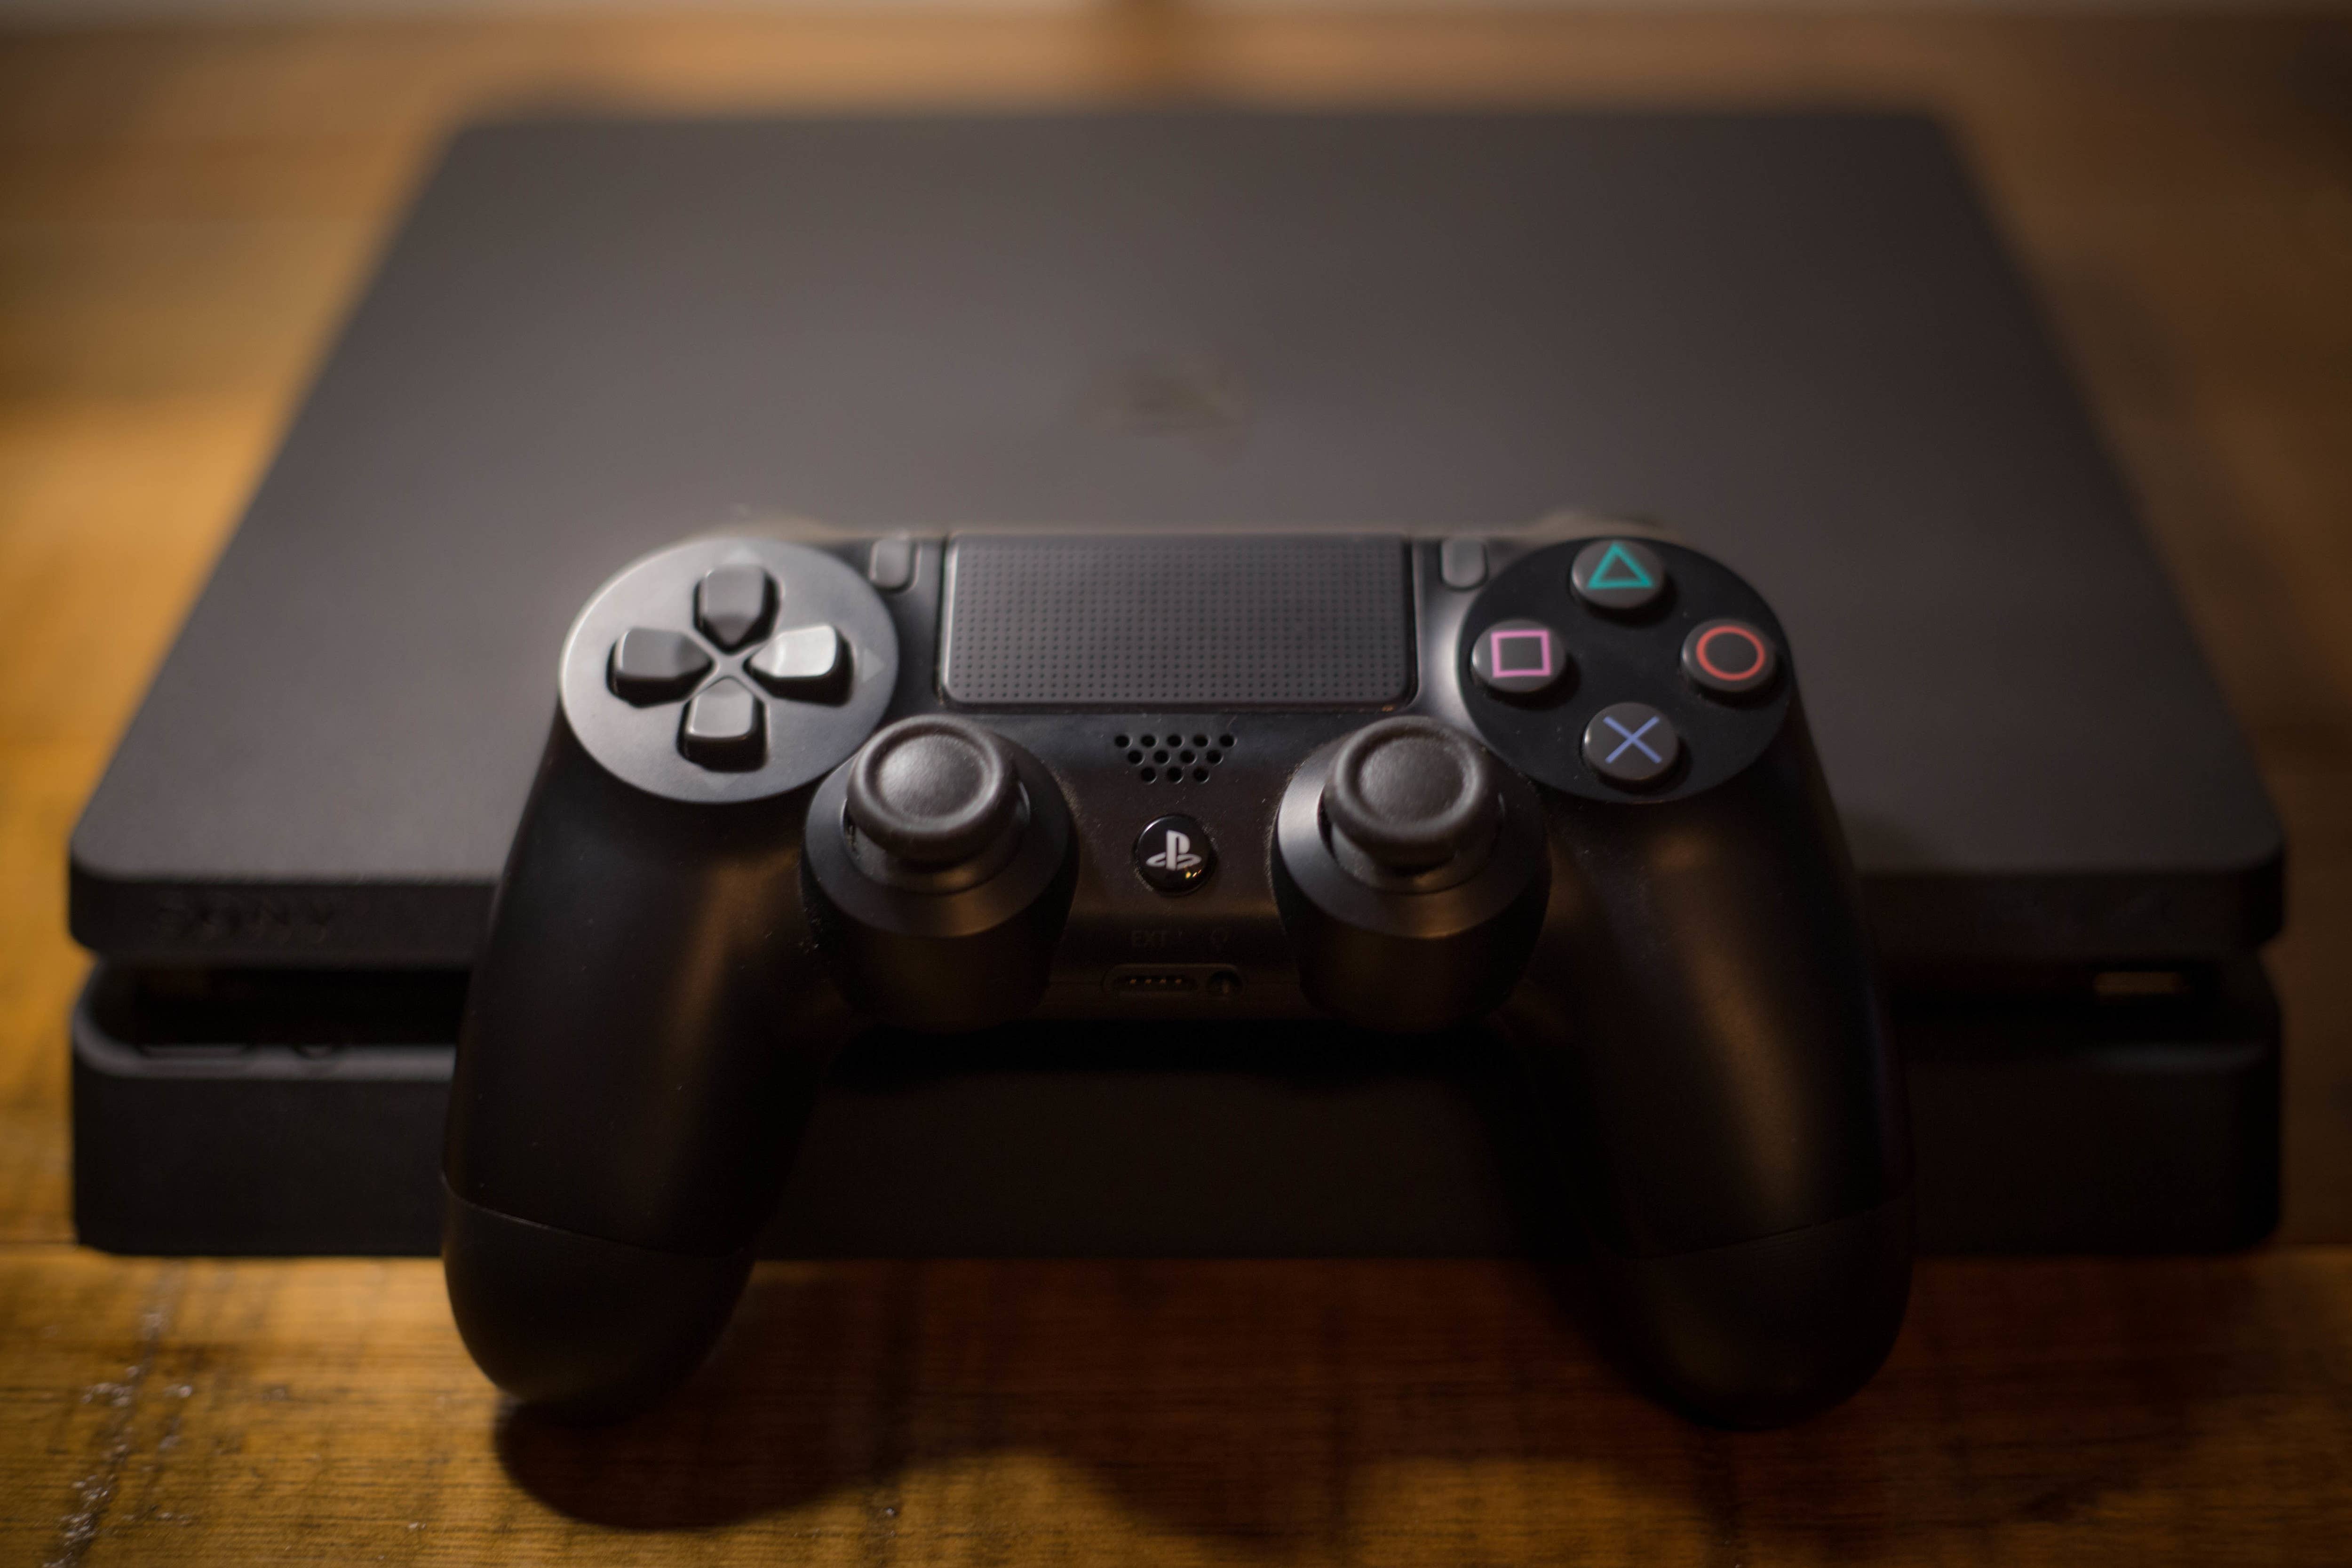 A Sony PlayStation 4 video game console with a black wireless controller